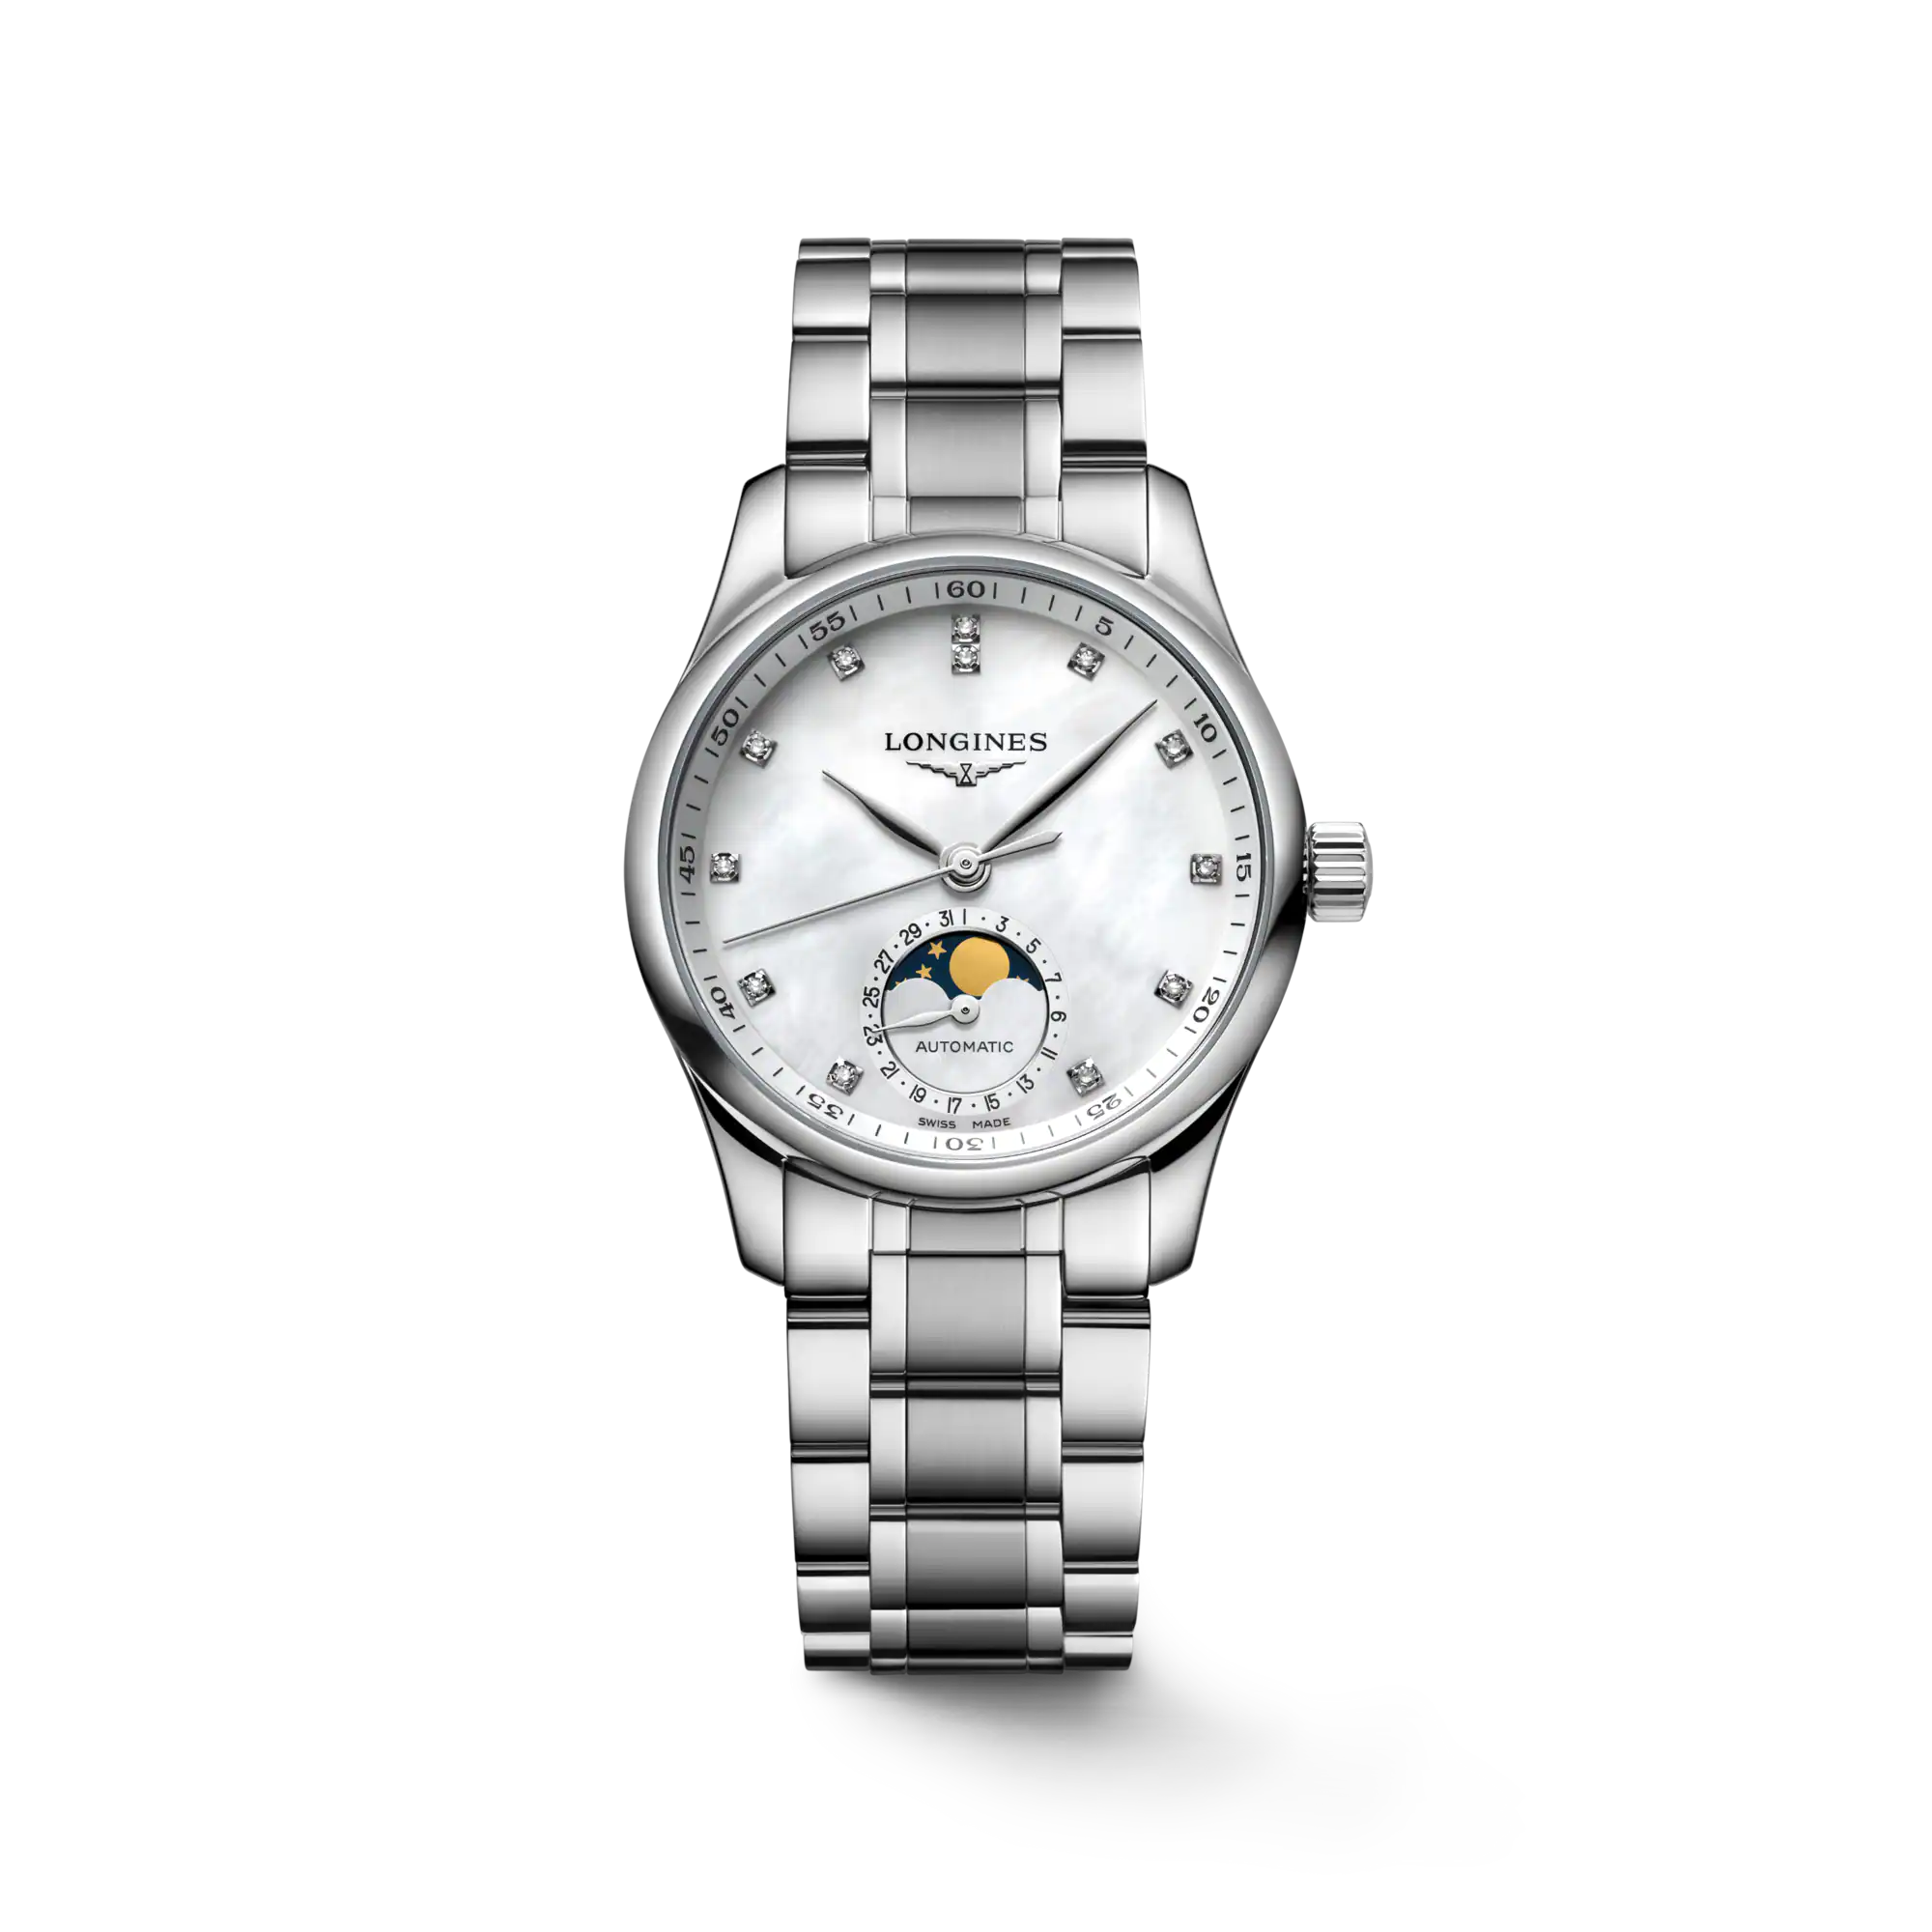 The Longines Master Collection Automatic Women's Watch L24094876